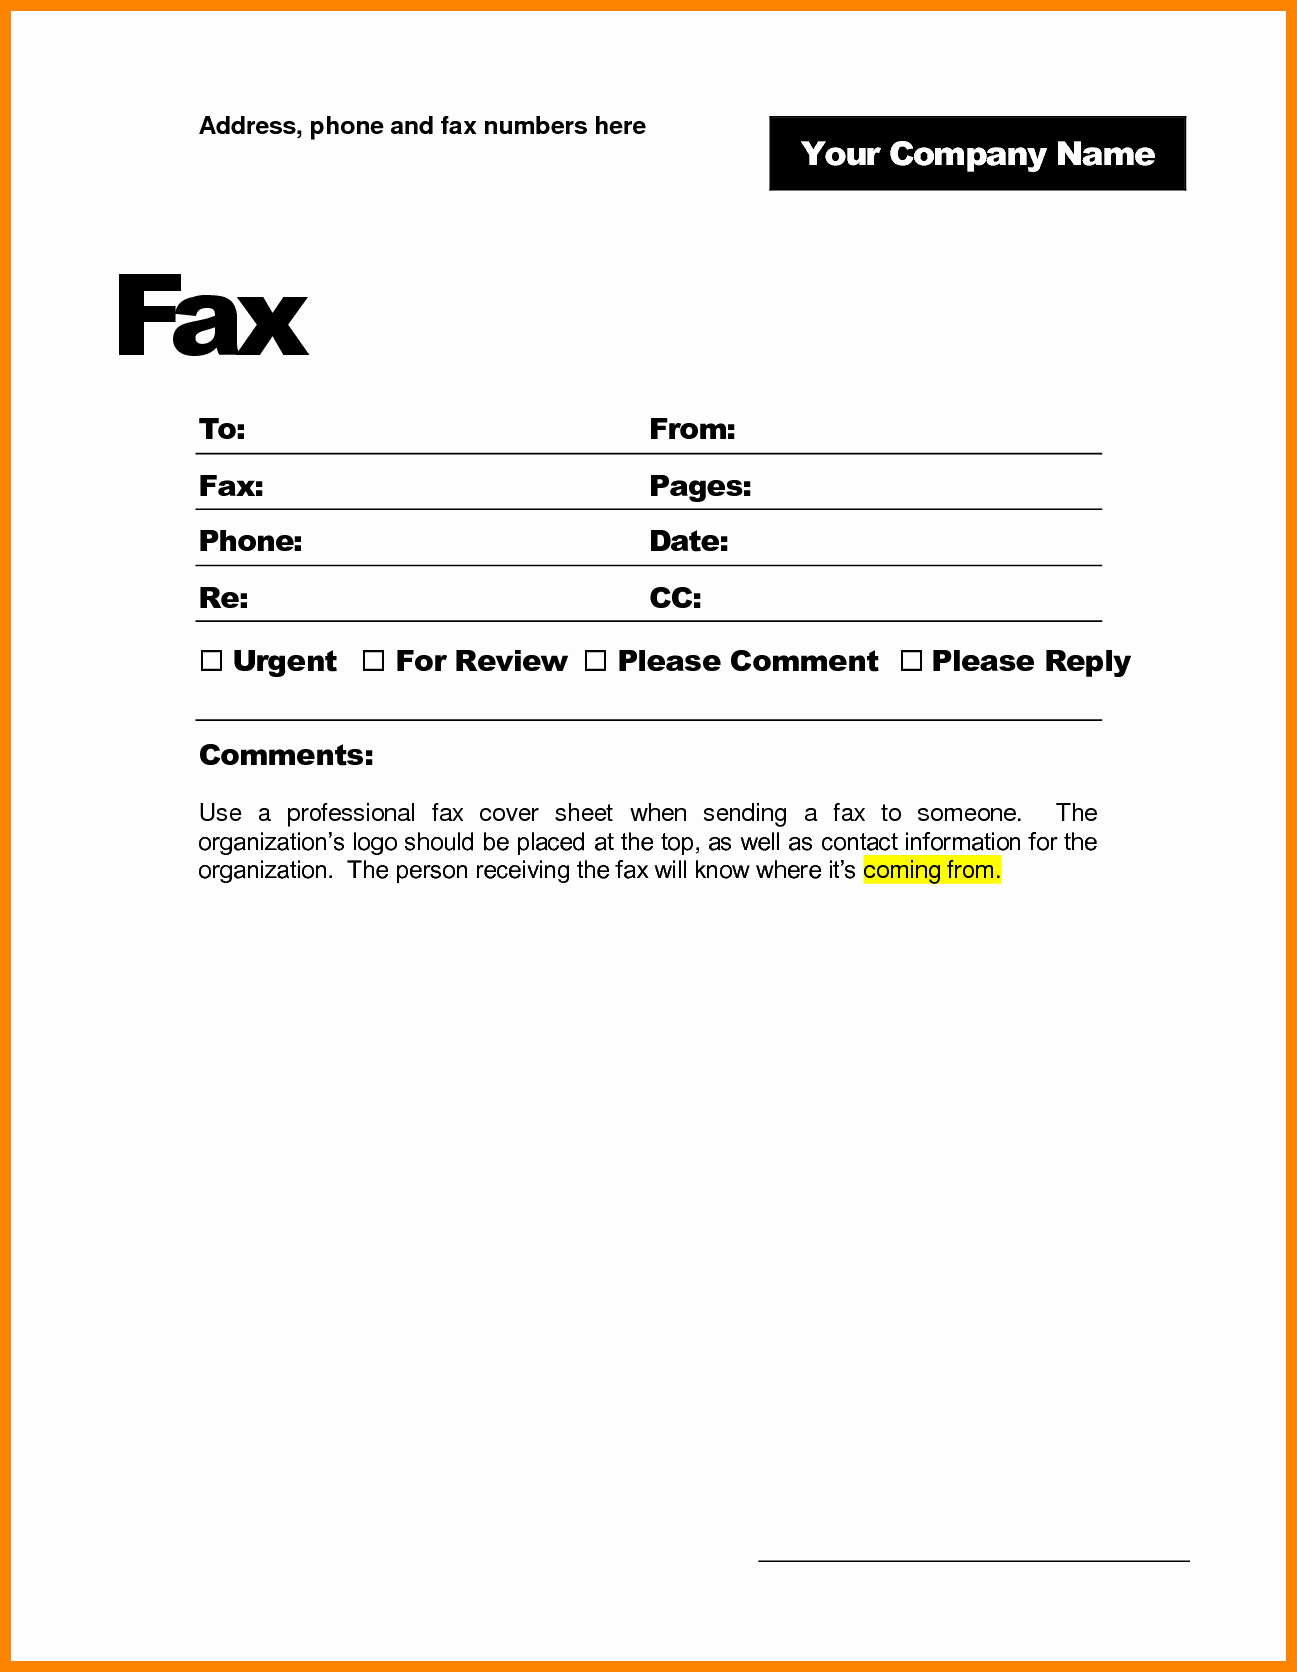 Fax Cover Sheet Microsoft Office Elegant 6 Free Fax Cover Sheet Template for Word